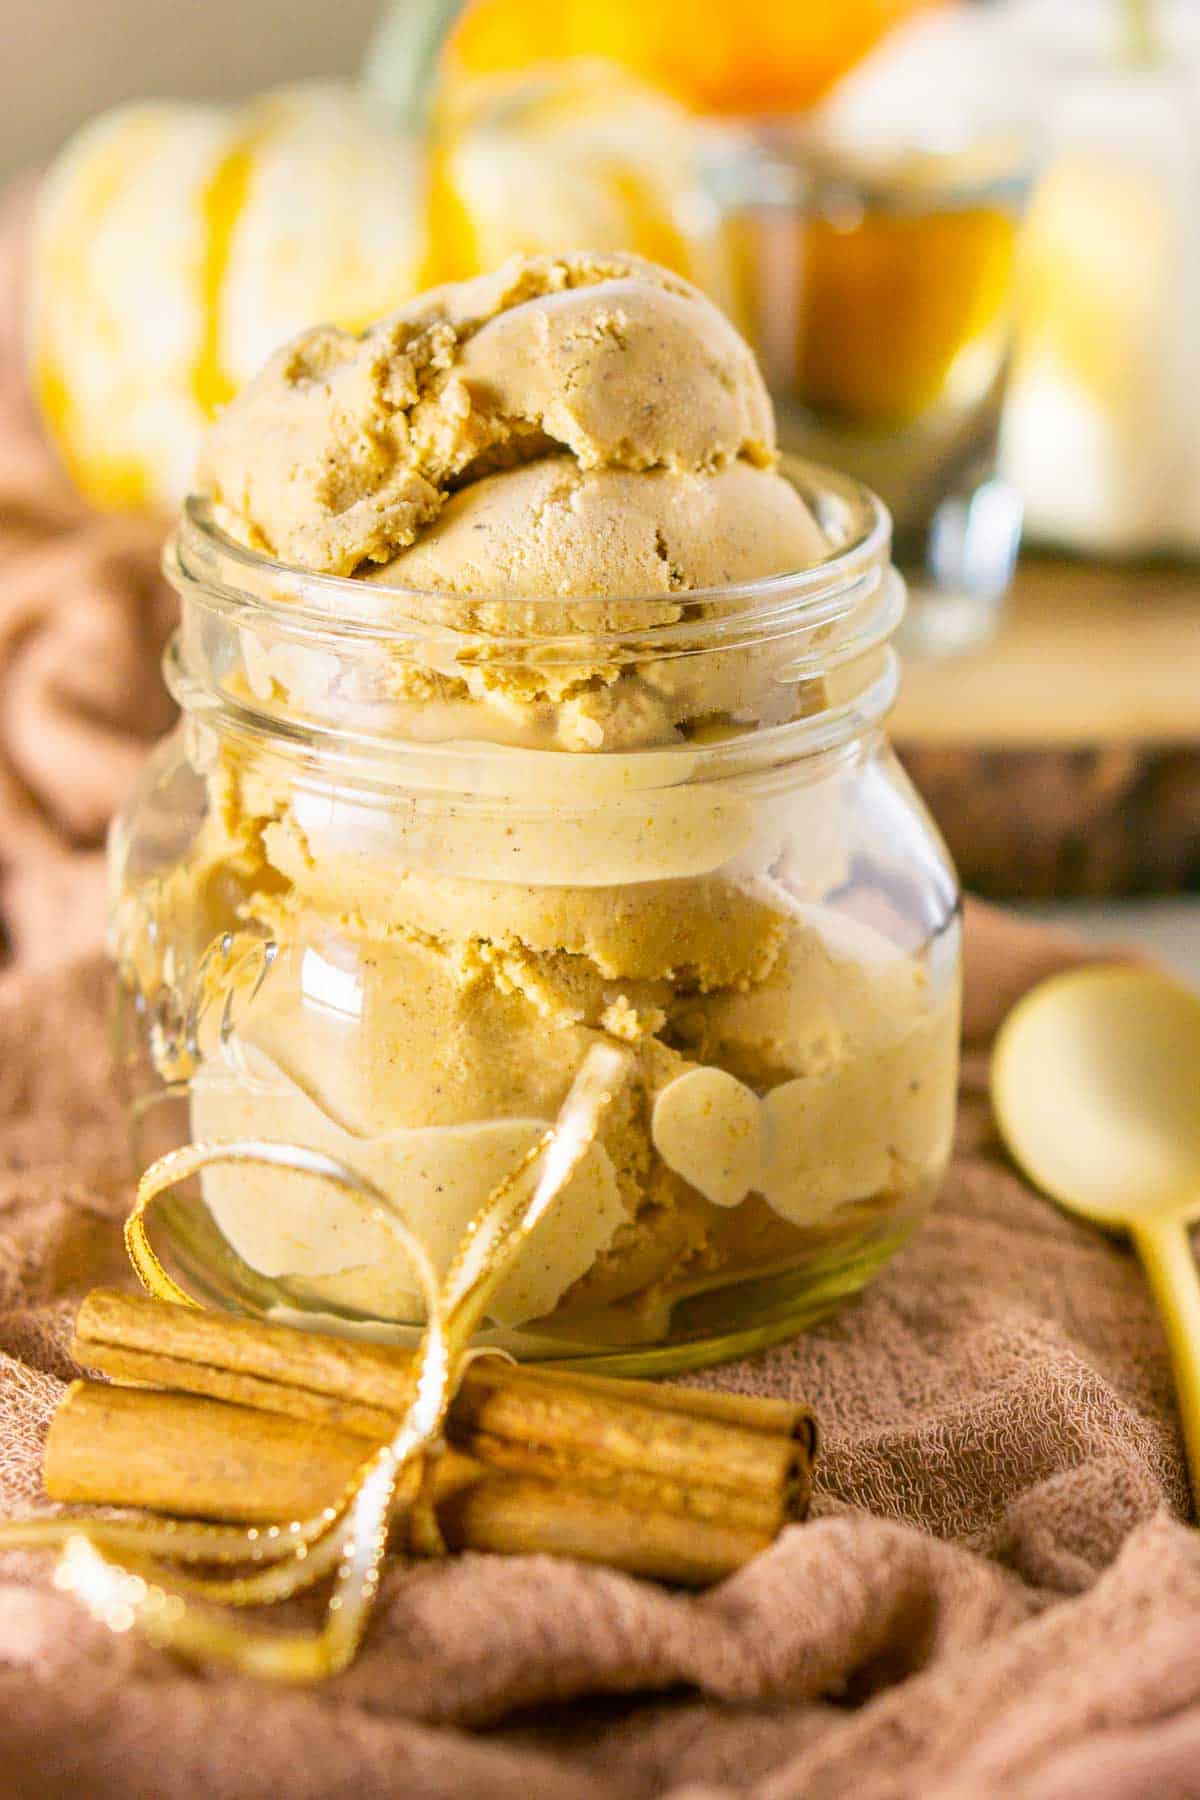 A close-up of the bourbon pumpkin ice cream with a bundle of cinnamon sticks in front of it.